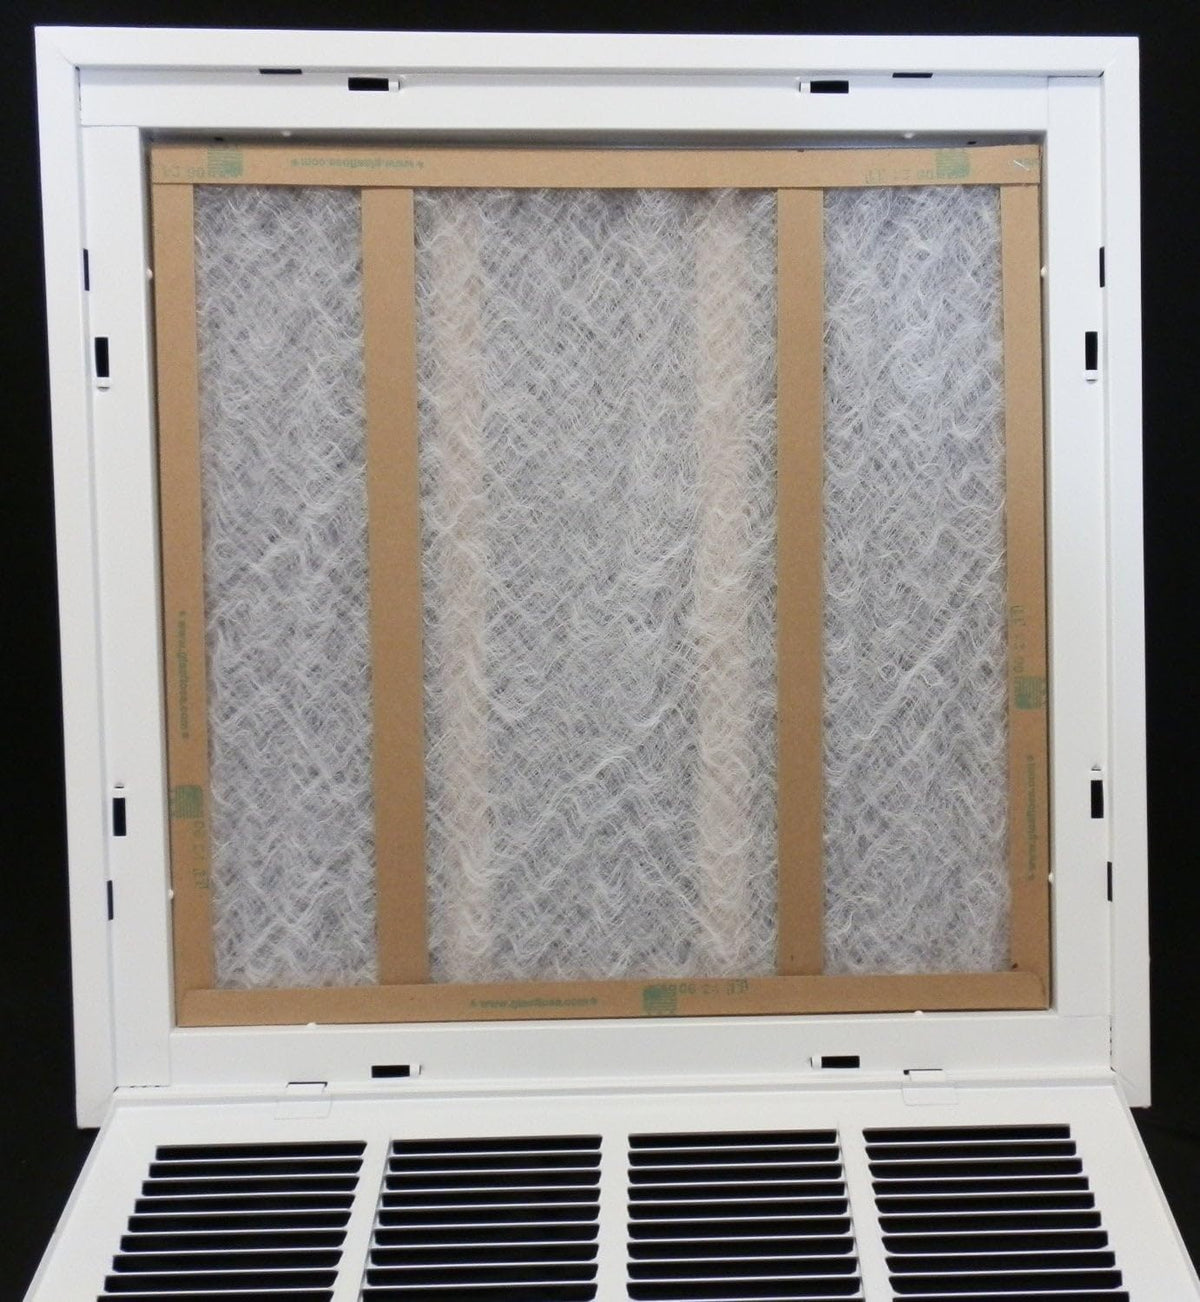 34&quot; X 32&quot; Steel Return Air Filter Grille for 1&quot; Filter - Removable Frame - [Outer Dimensions: 36 5/8&quot; X 34 5/8&quot;]